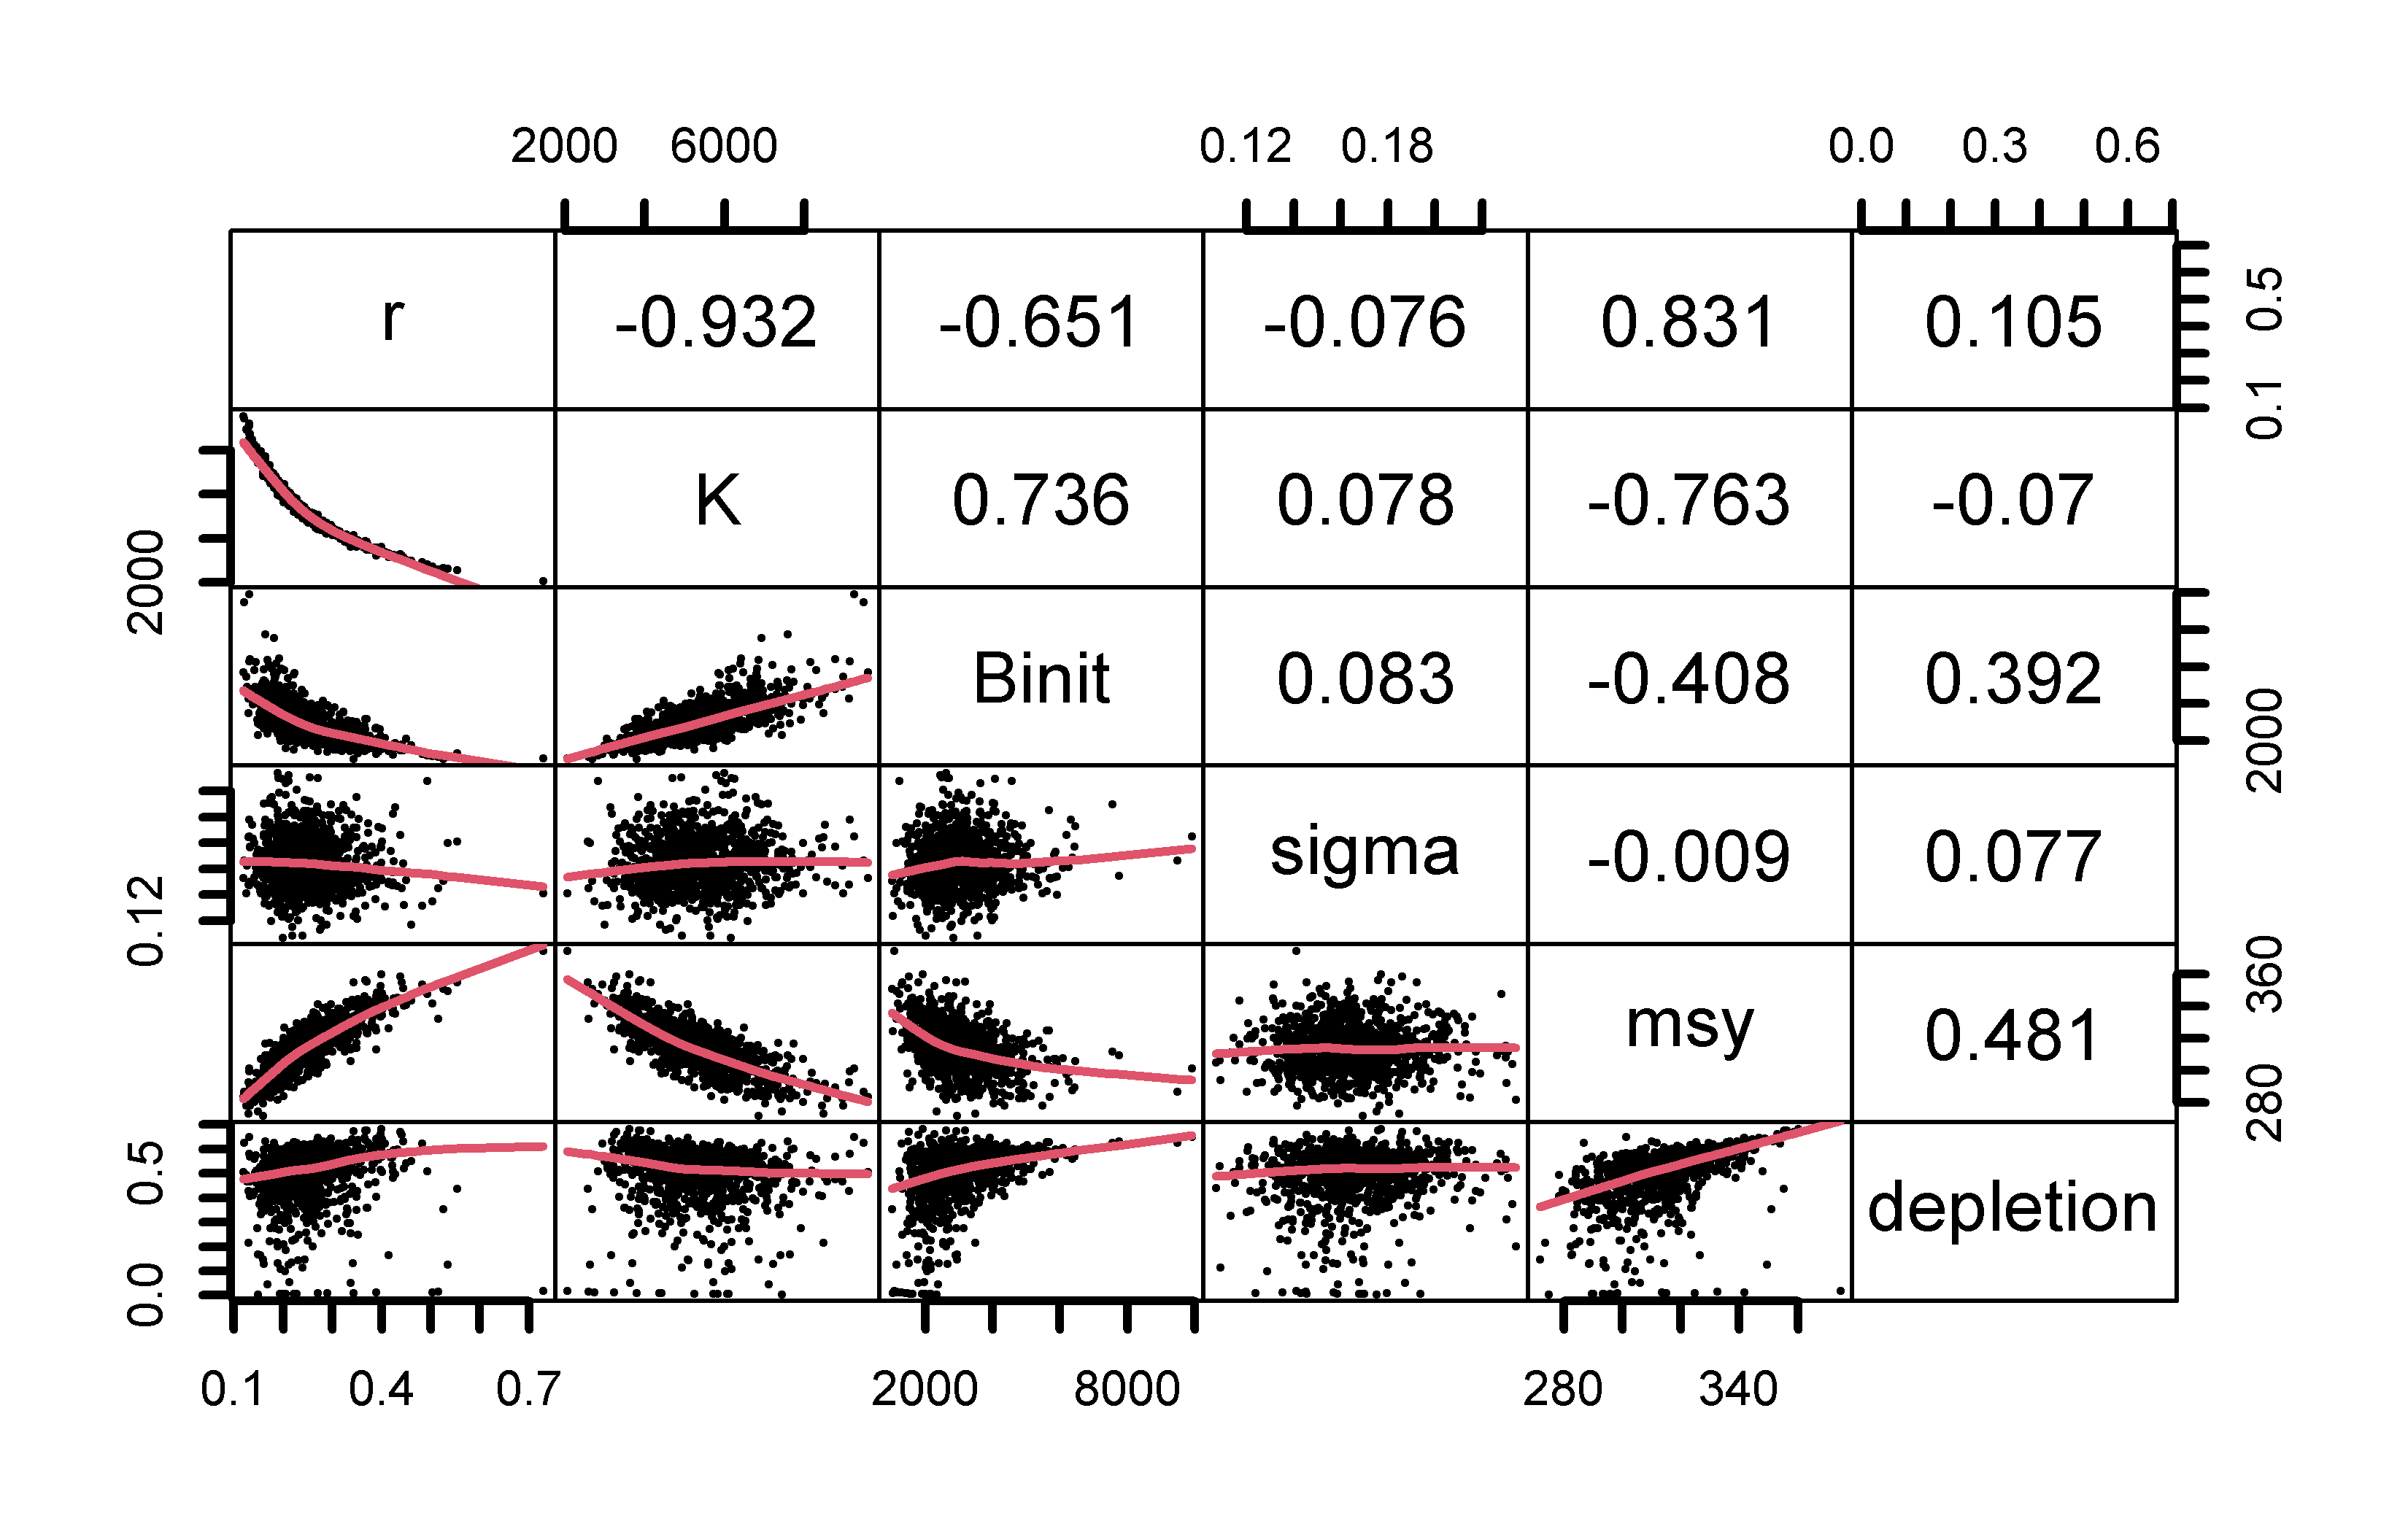 The relationships between the model parameters for the Schaefer model when using the multi-variate normal distribution to generate the parameter combinations. The relationship between r - K is much tighter than in the bootstrap samples and there is almost no relationship between sigma and the other parameters. The depletion plots indicate some trajectories go extinct.